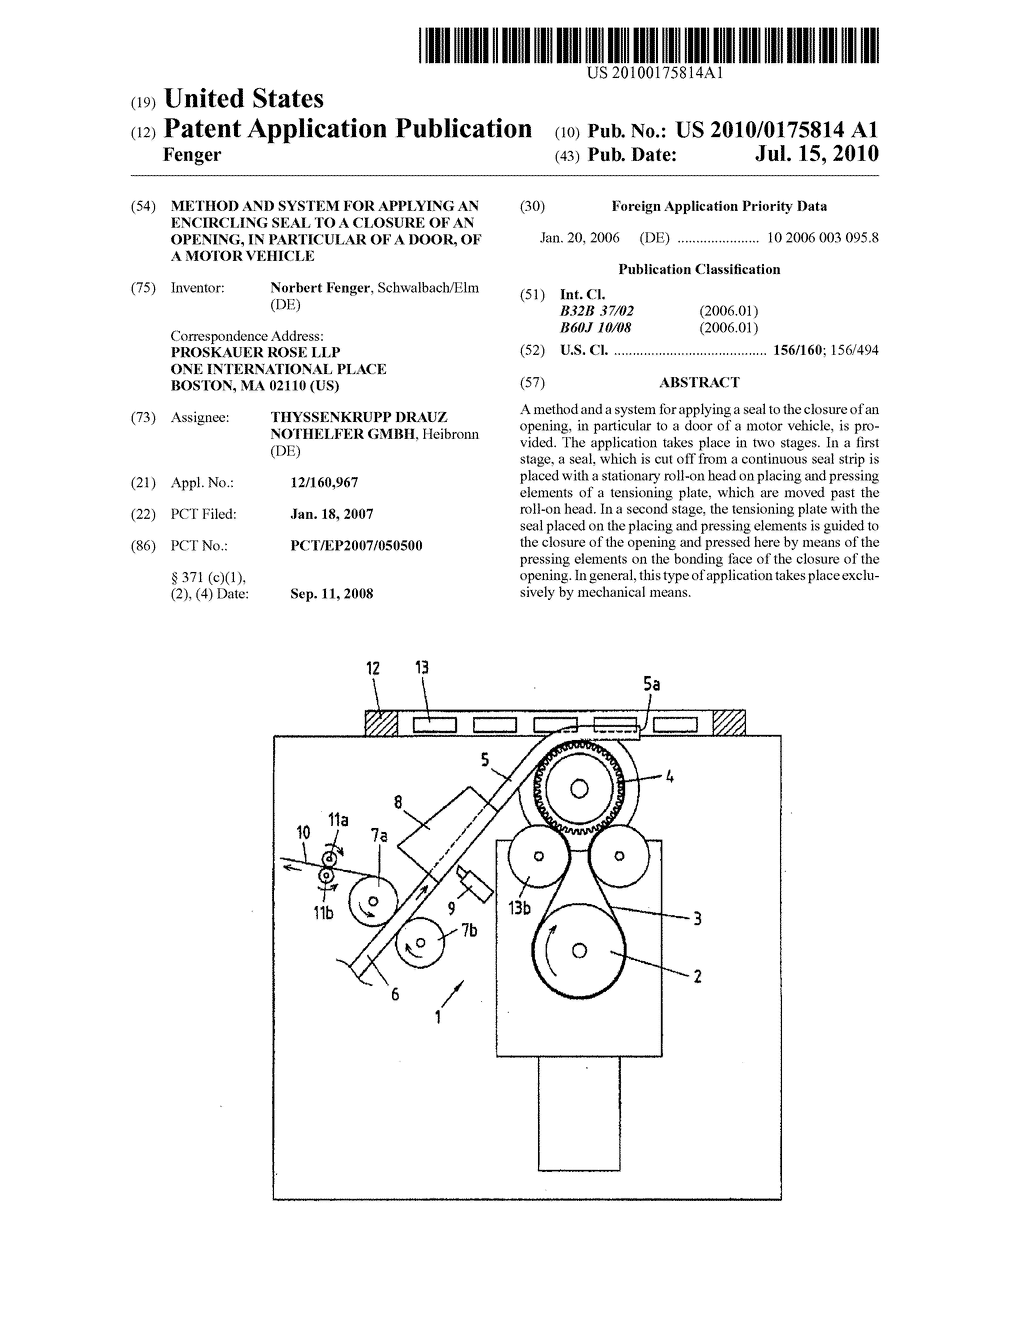 Method and system for applying an encircling seal to a closure of an opening, in particular of a door, of a motor vehicle - diagram, schematic, and image 01